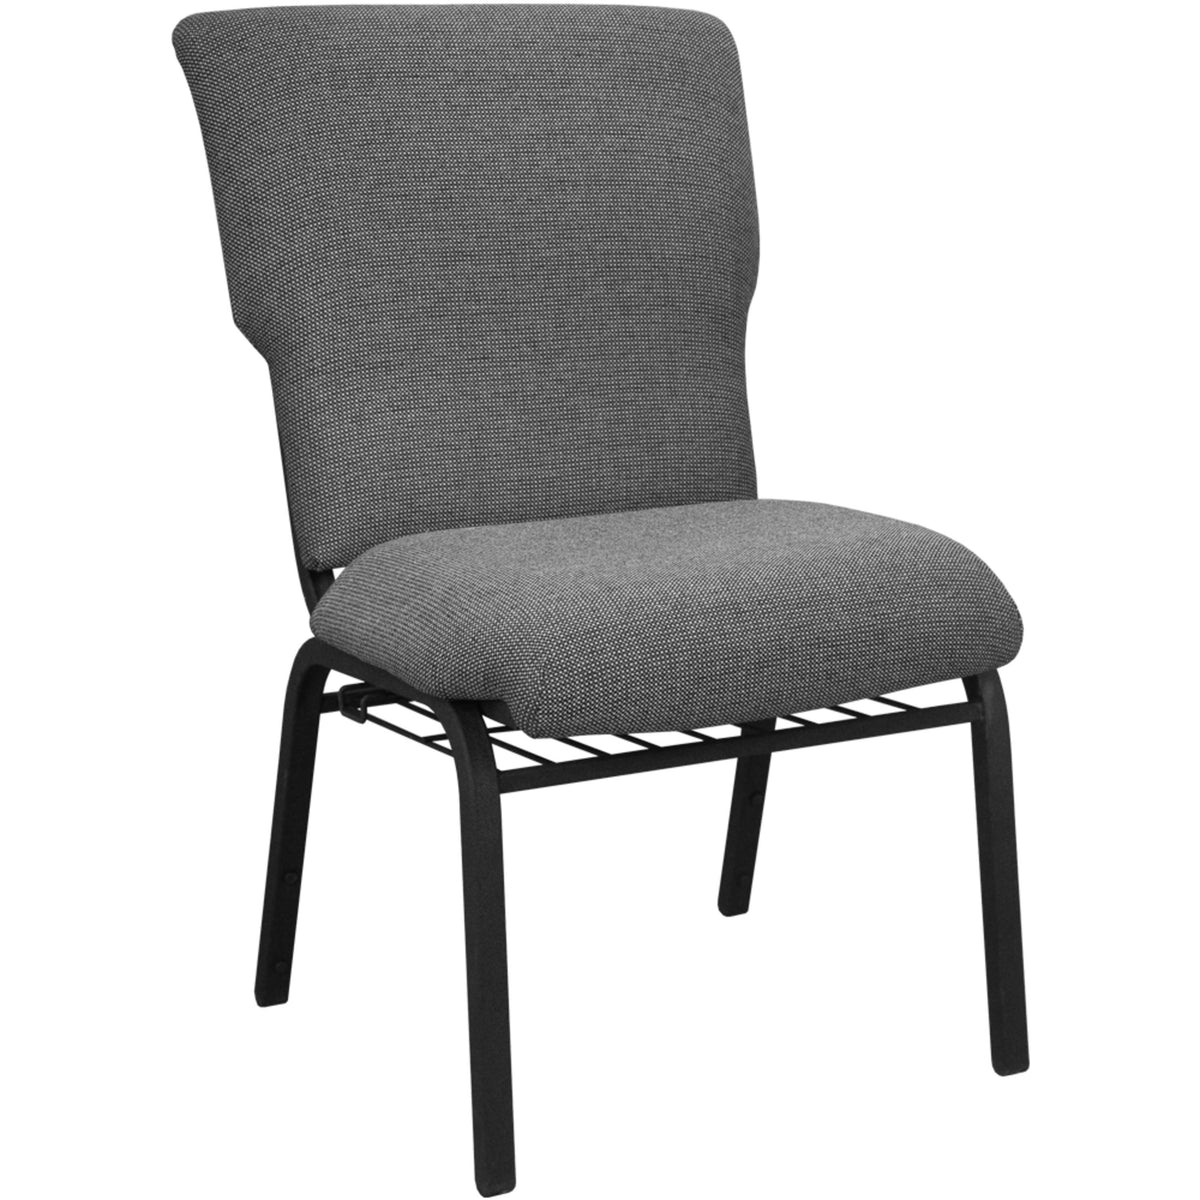 Black Marble Fabric/Black Frame |#| Black Marble Discount Church Chair - 21 in. Wide